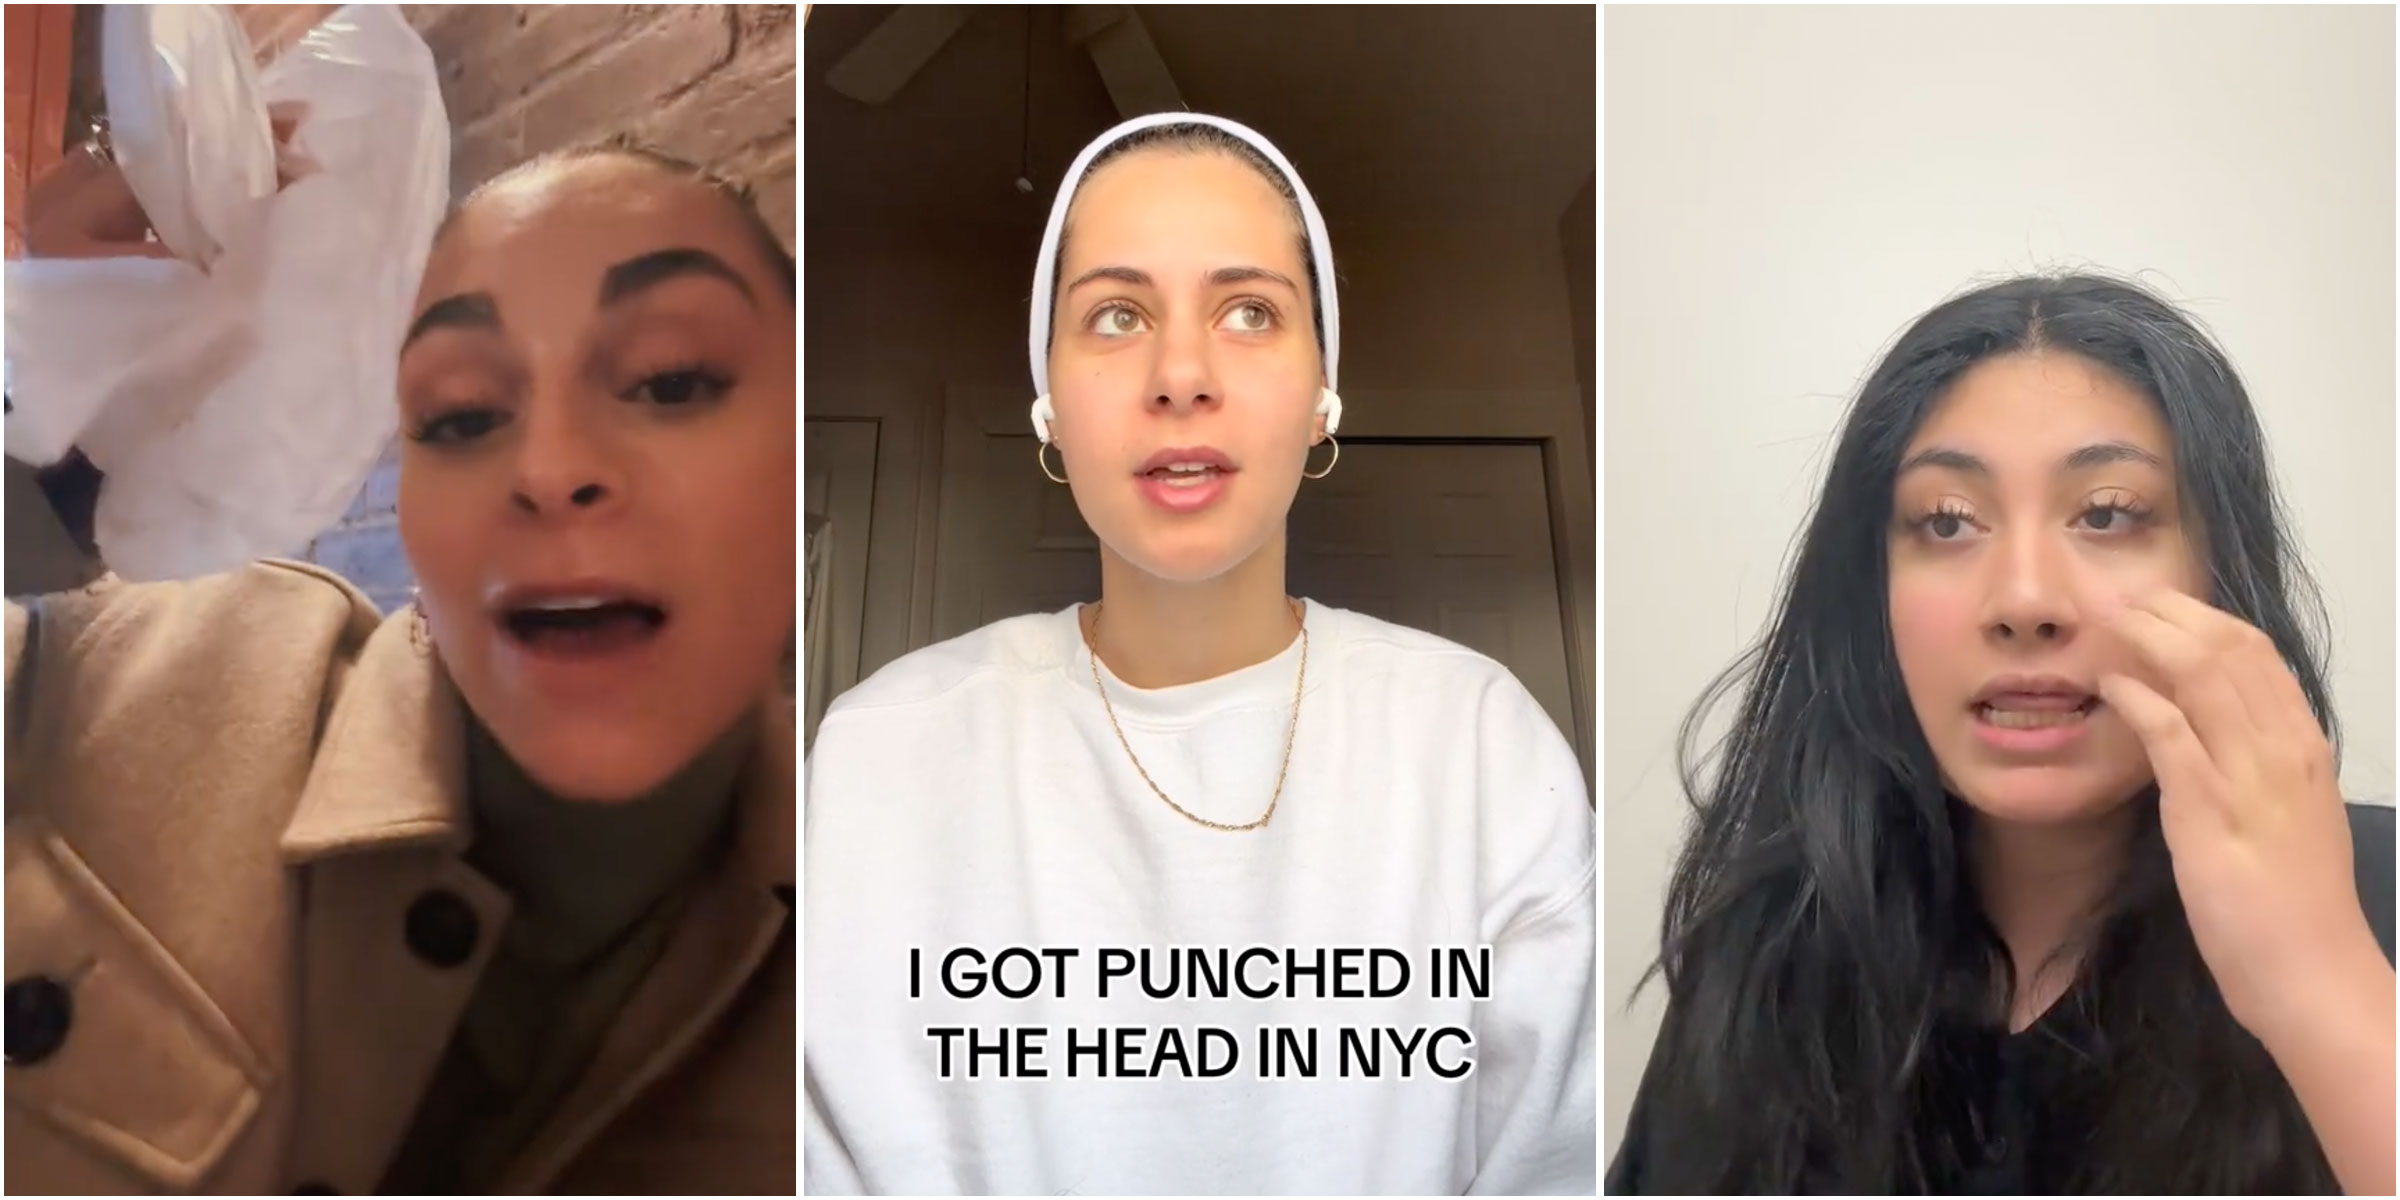 screenshots from three tiktoks showing women speaking about being punched in New York